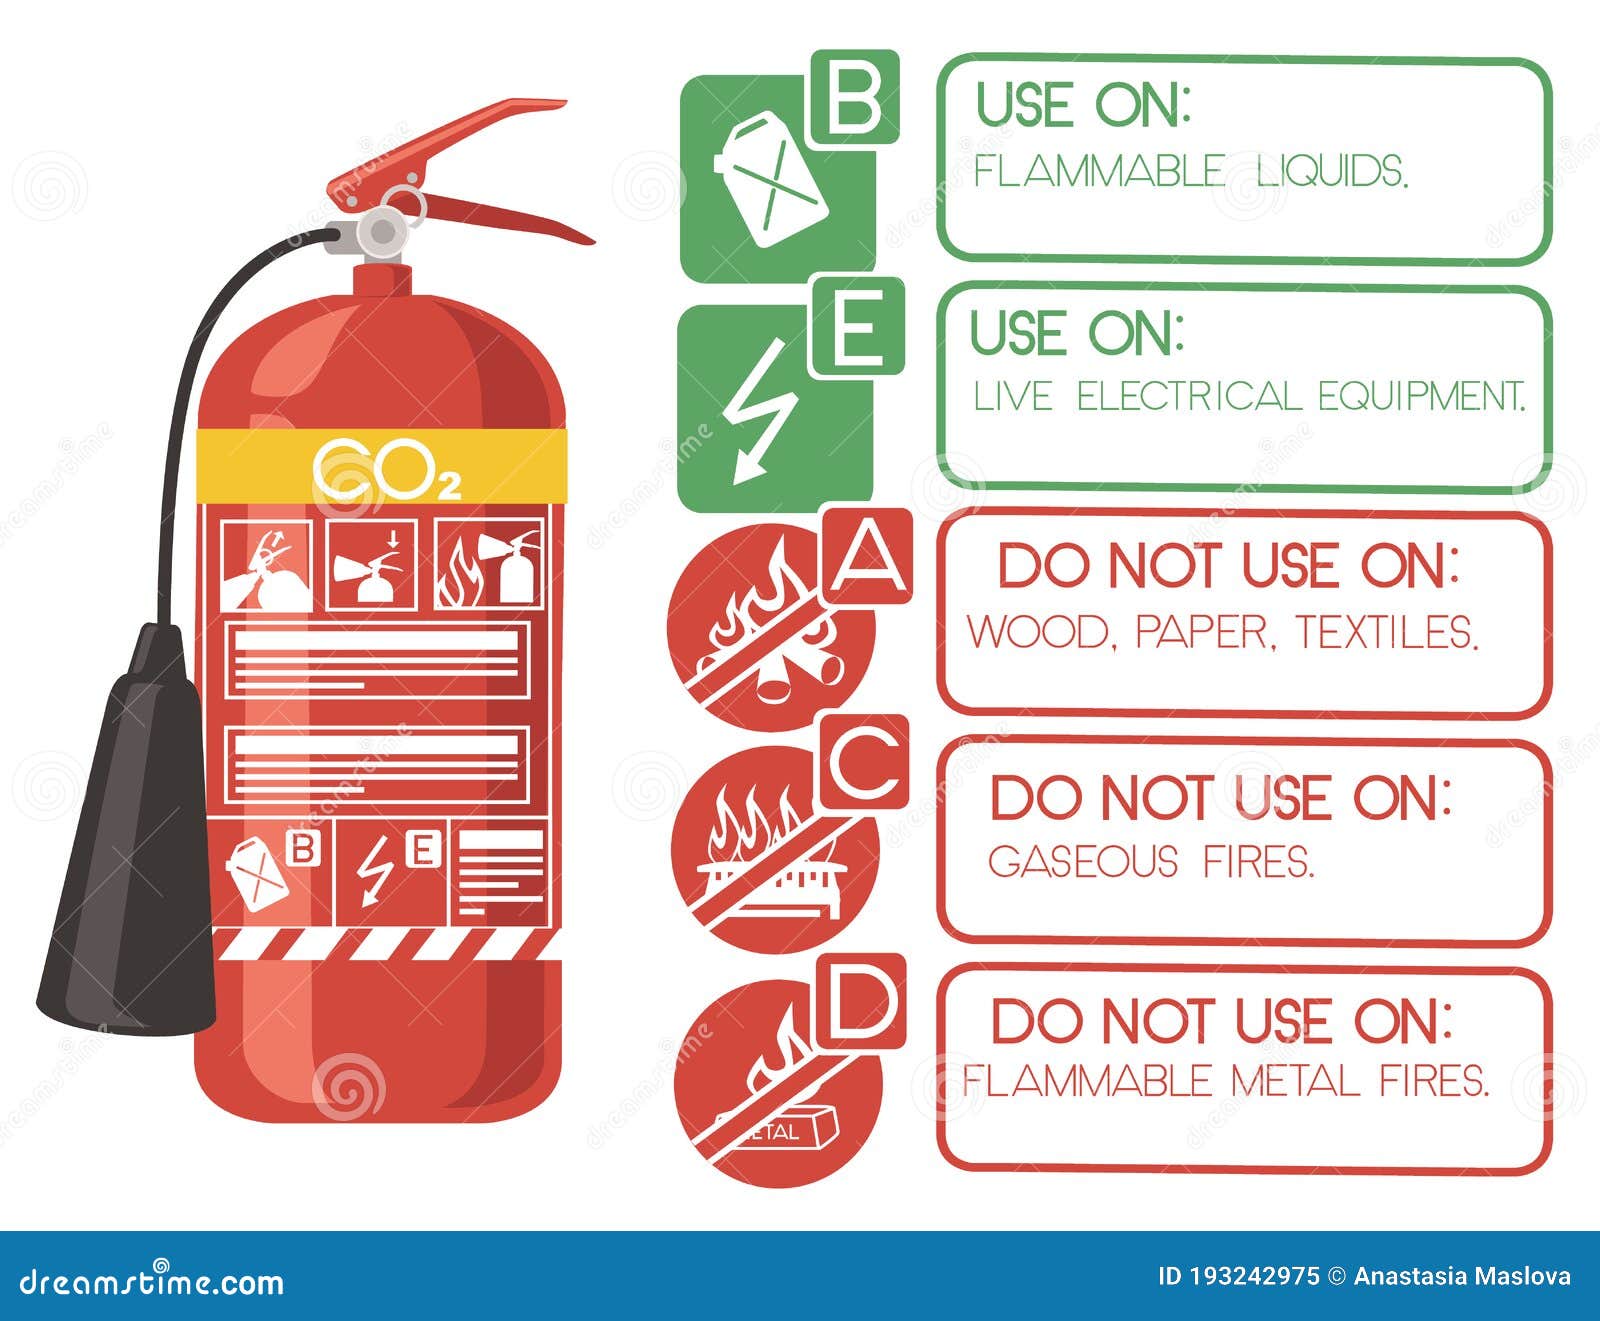 co2 fire extinguisher with safe labels simple tips how to use icons flat   on white background